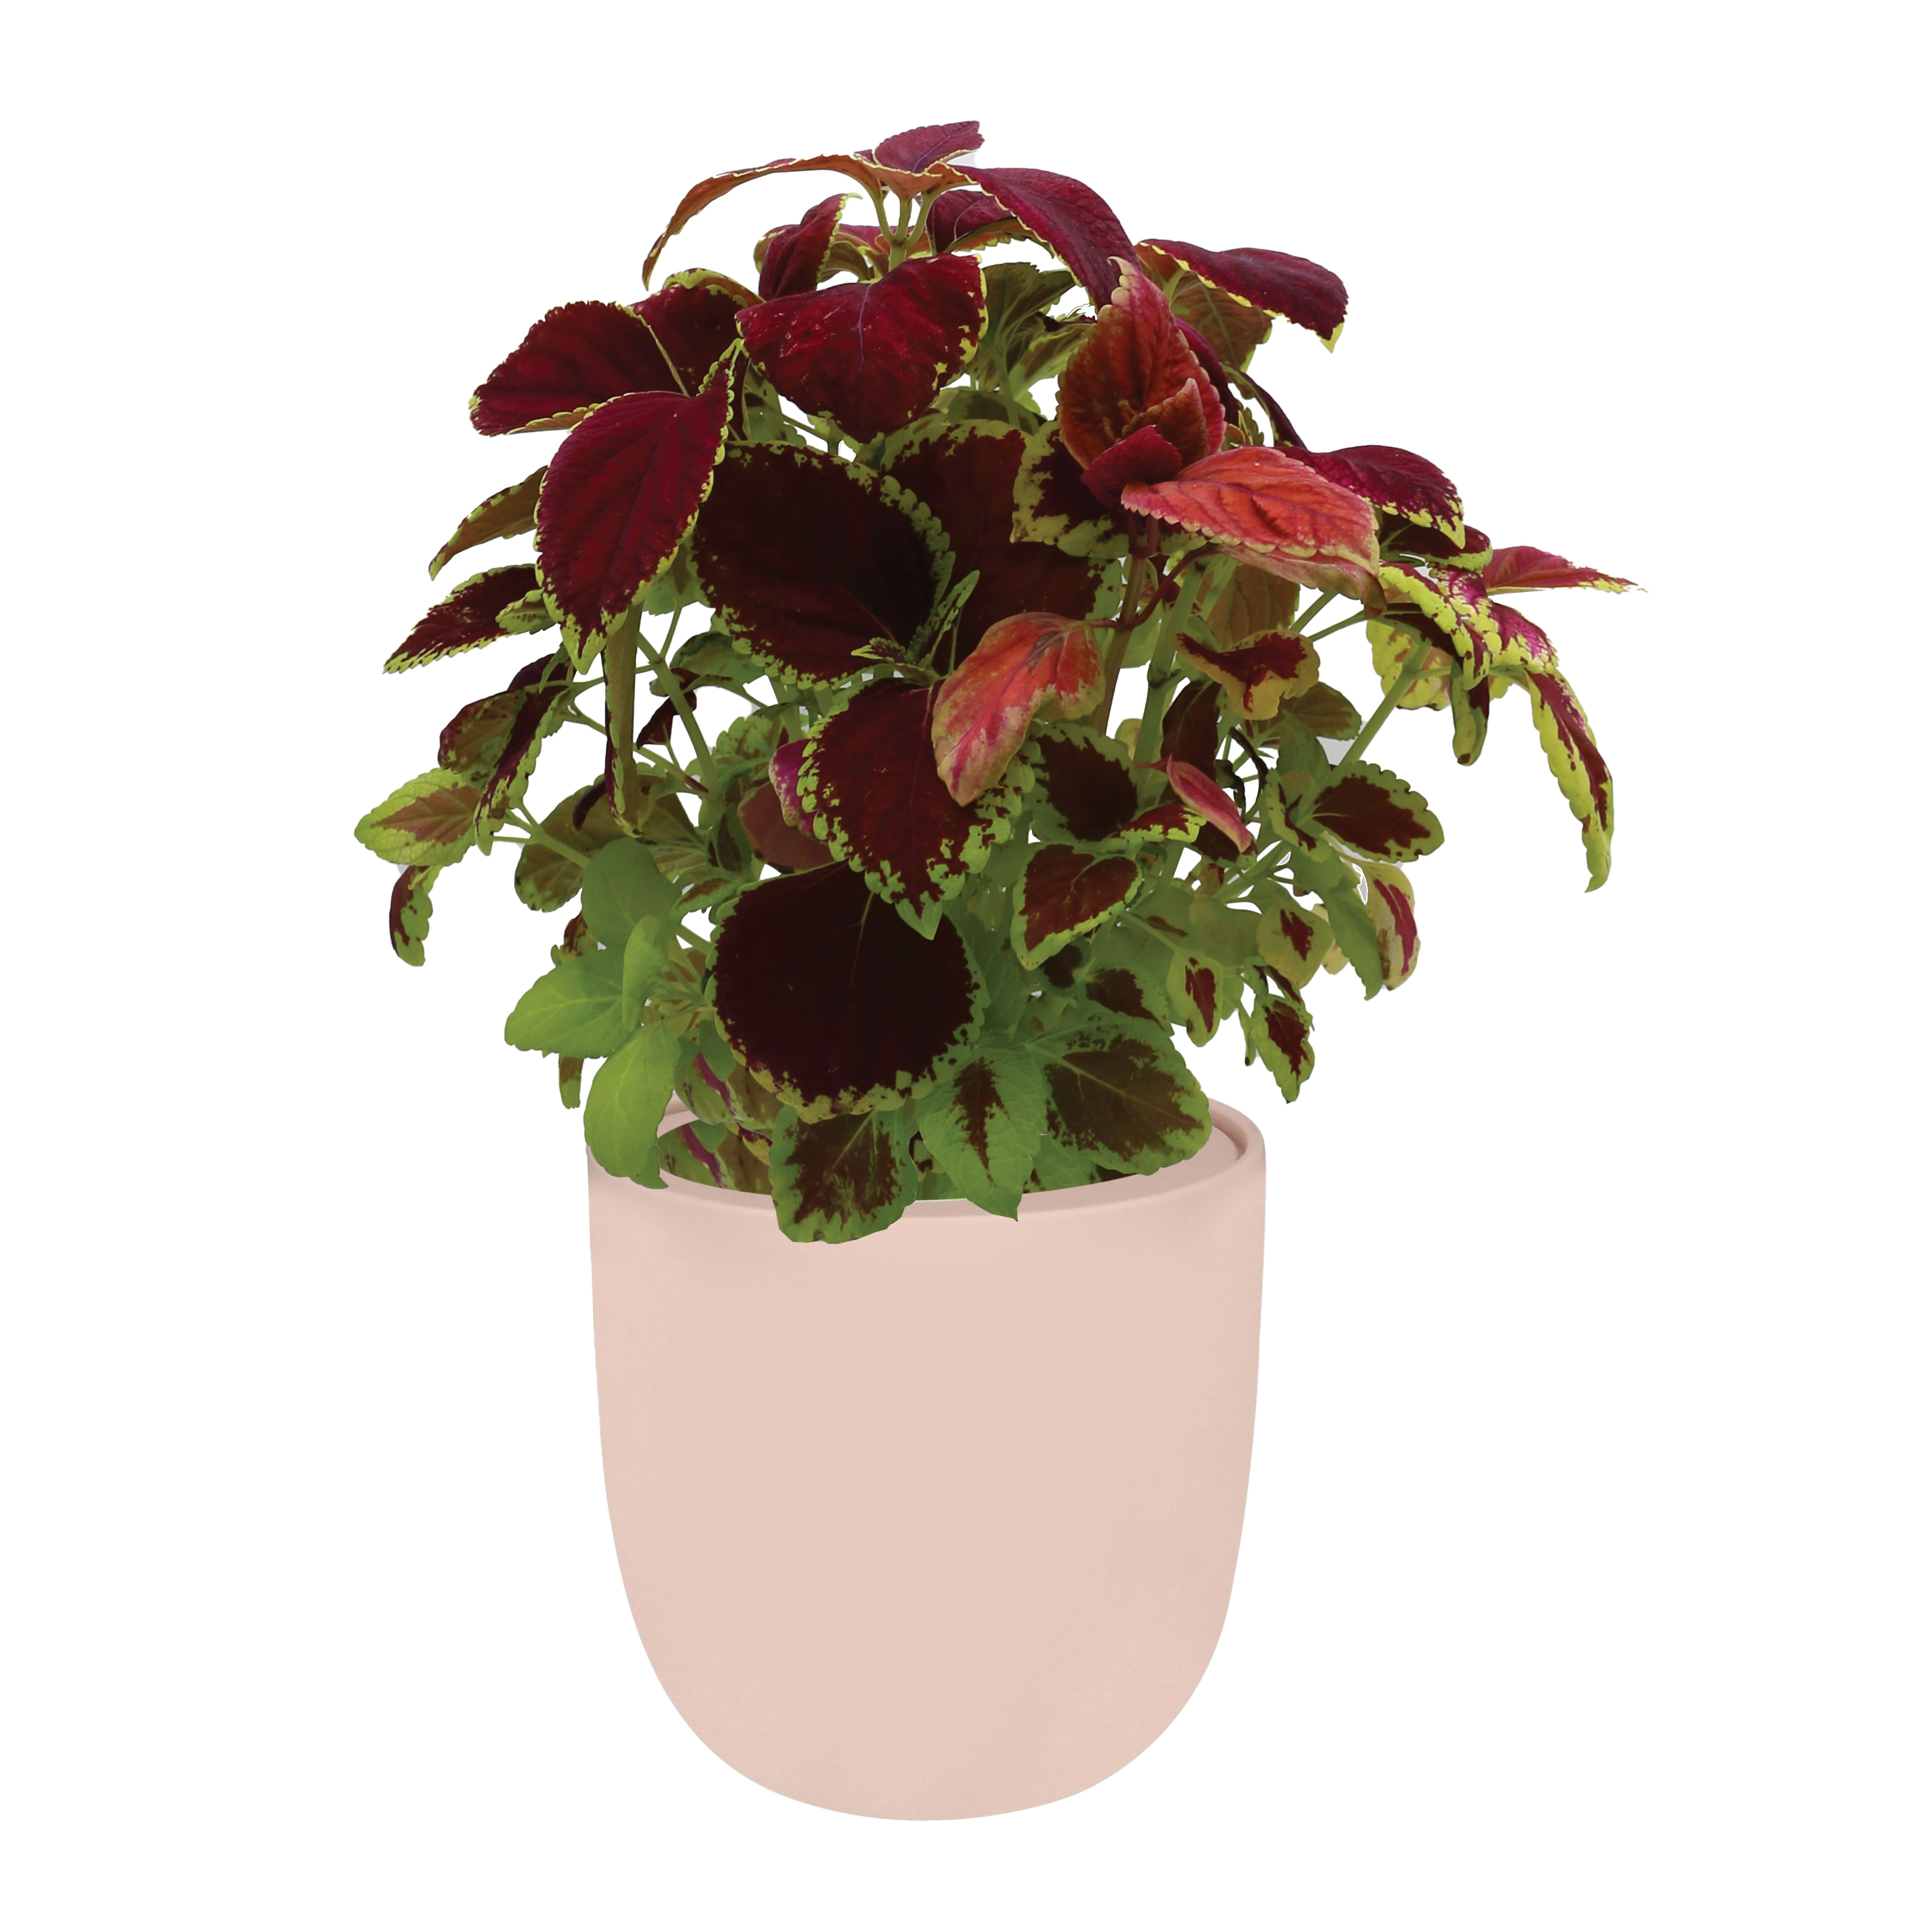 Hydroponic Growing Kit with Pink Ceramic Pot and Seeds (Coleus-White)